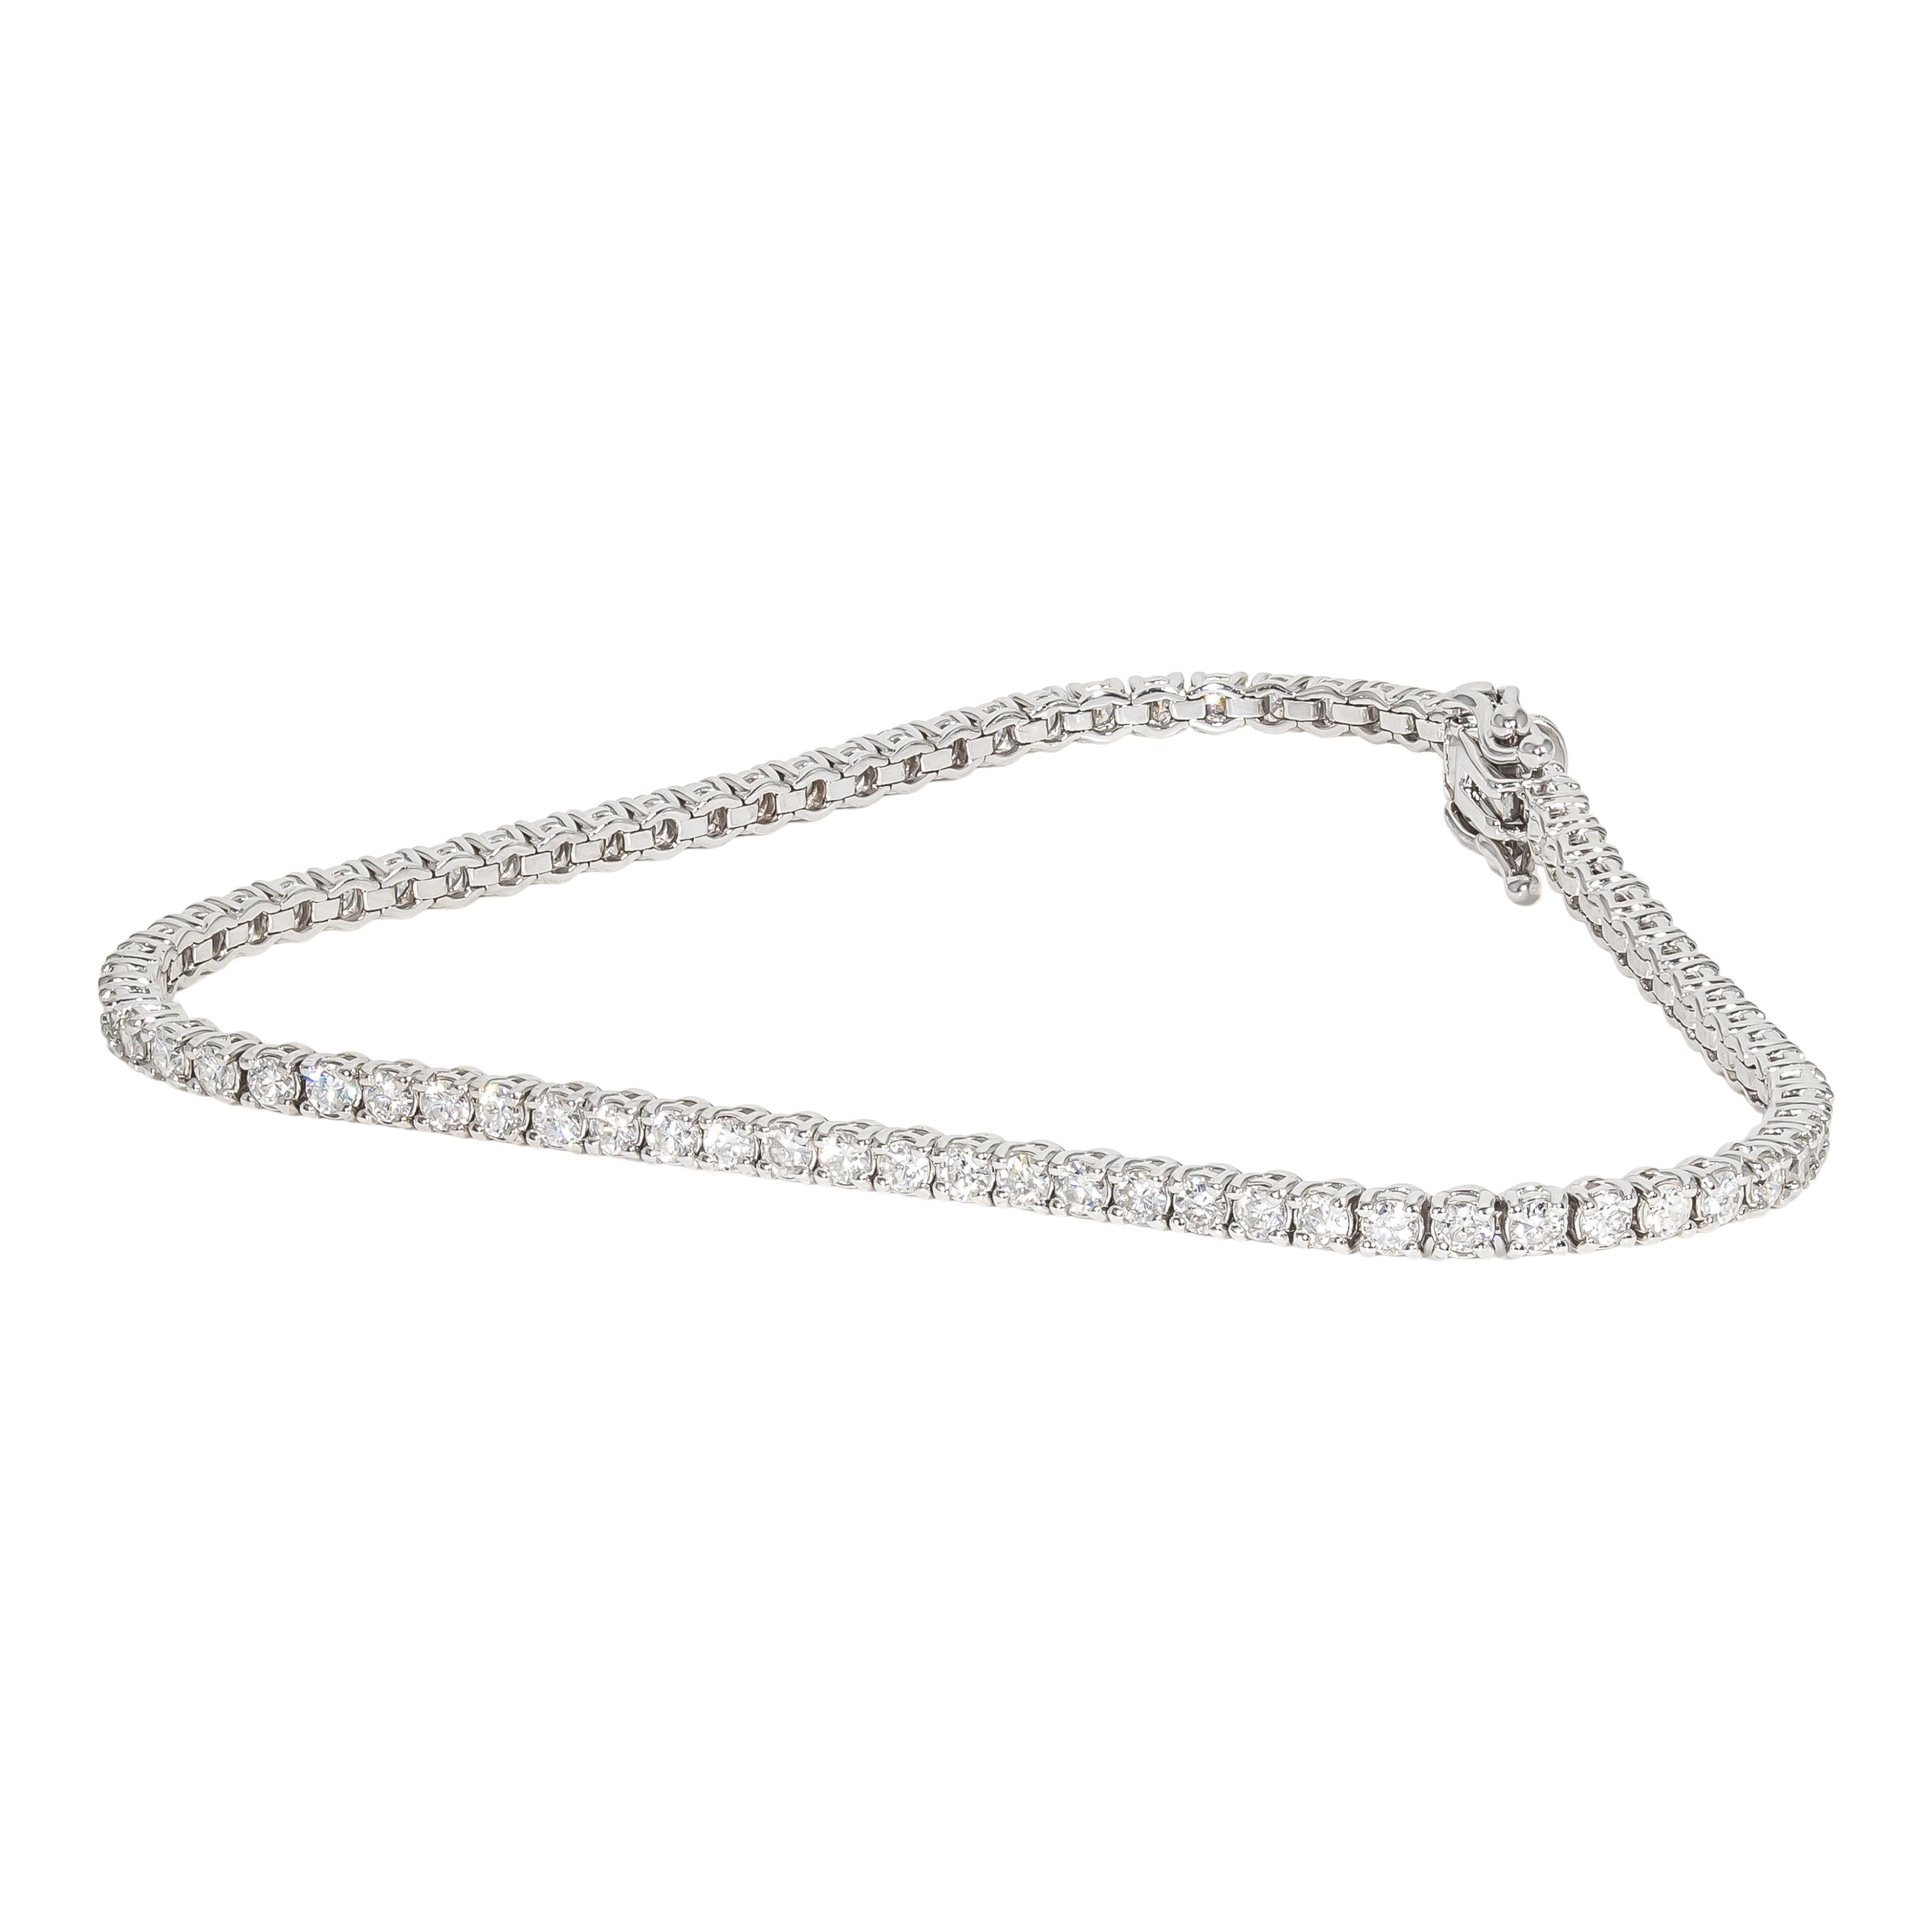 14k white gold bracelet containing 78 prong set natural diamonds. The total weight of the diamonds is 2.78 carats. The color and clarity grades of the diamonds contained within the bracelet have been graded by our Graduate Gemologists as E-F,